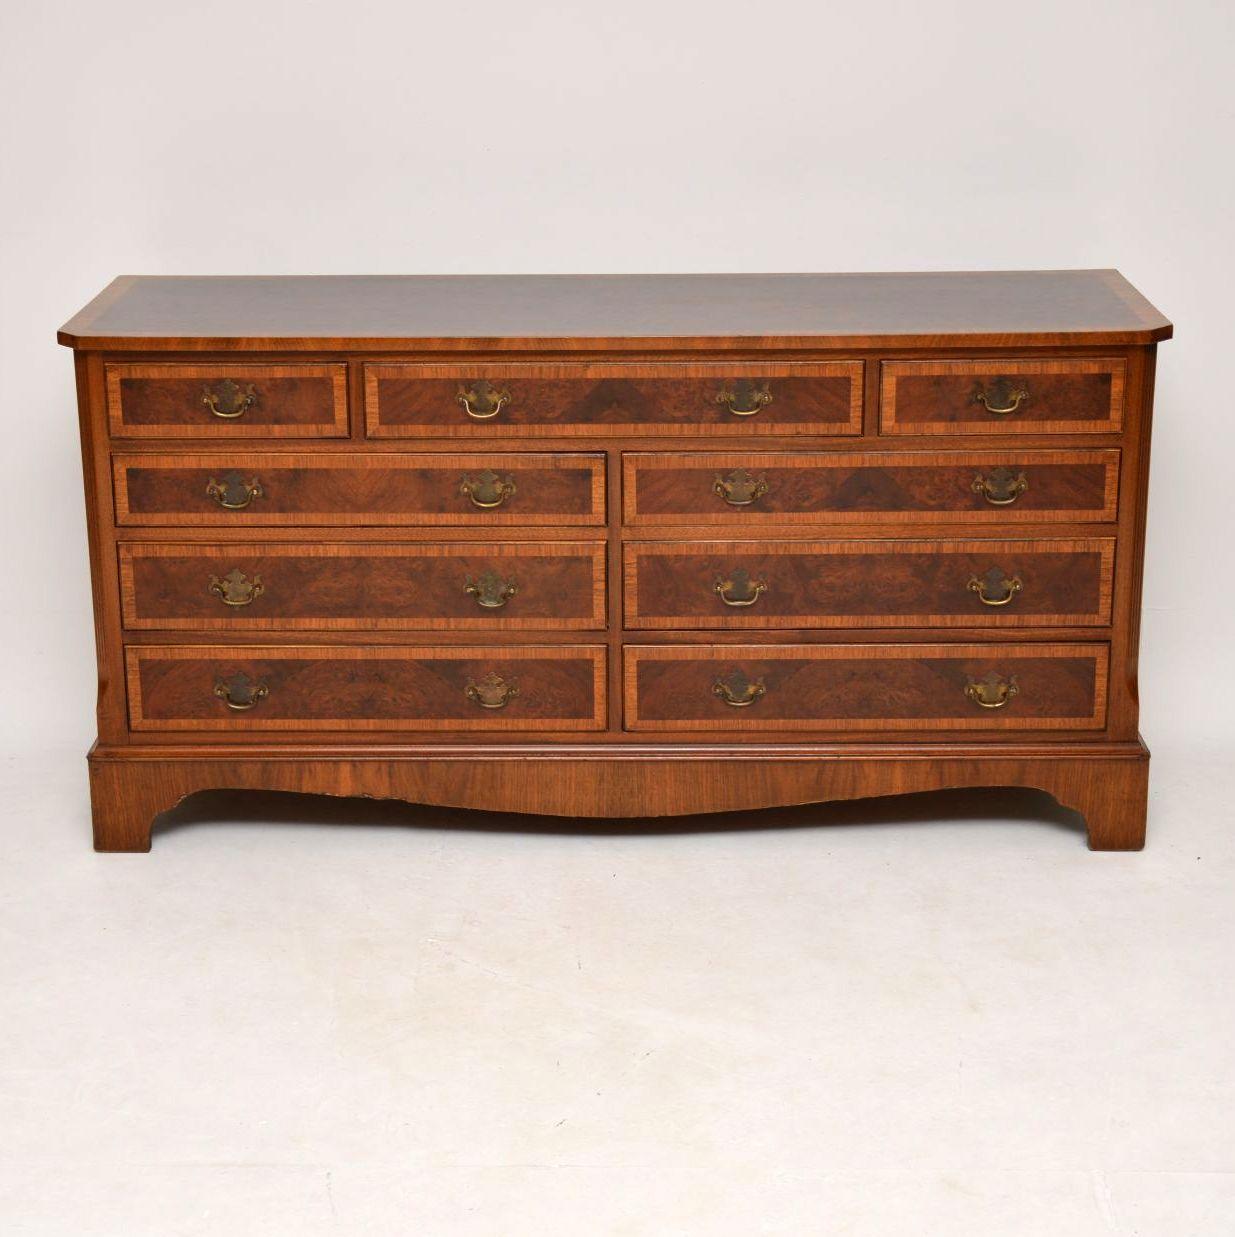 This antique Georgian style burr walnut long low chest of drawers, is a very useful item and would be ideal for placing a large T.V screen on top of. The top is burr walnut surrounded by a figured walnut cross banding. All the drawer fronts are a